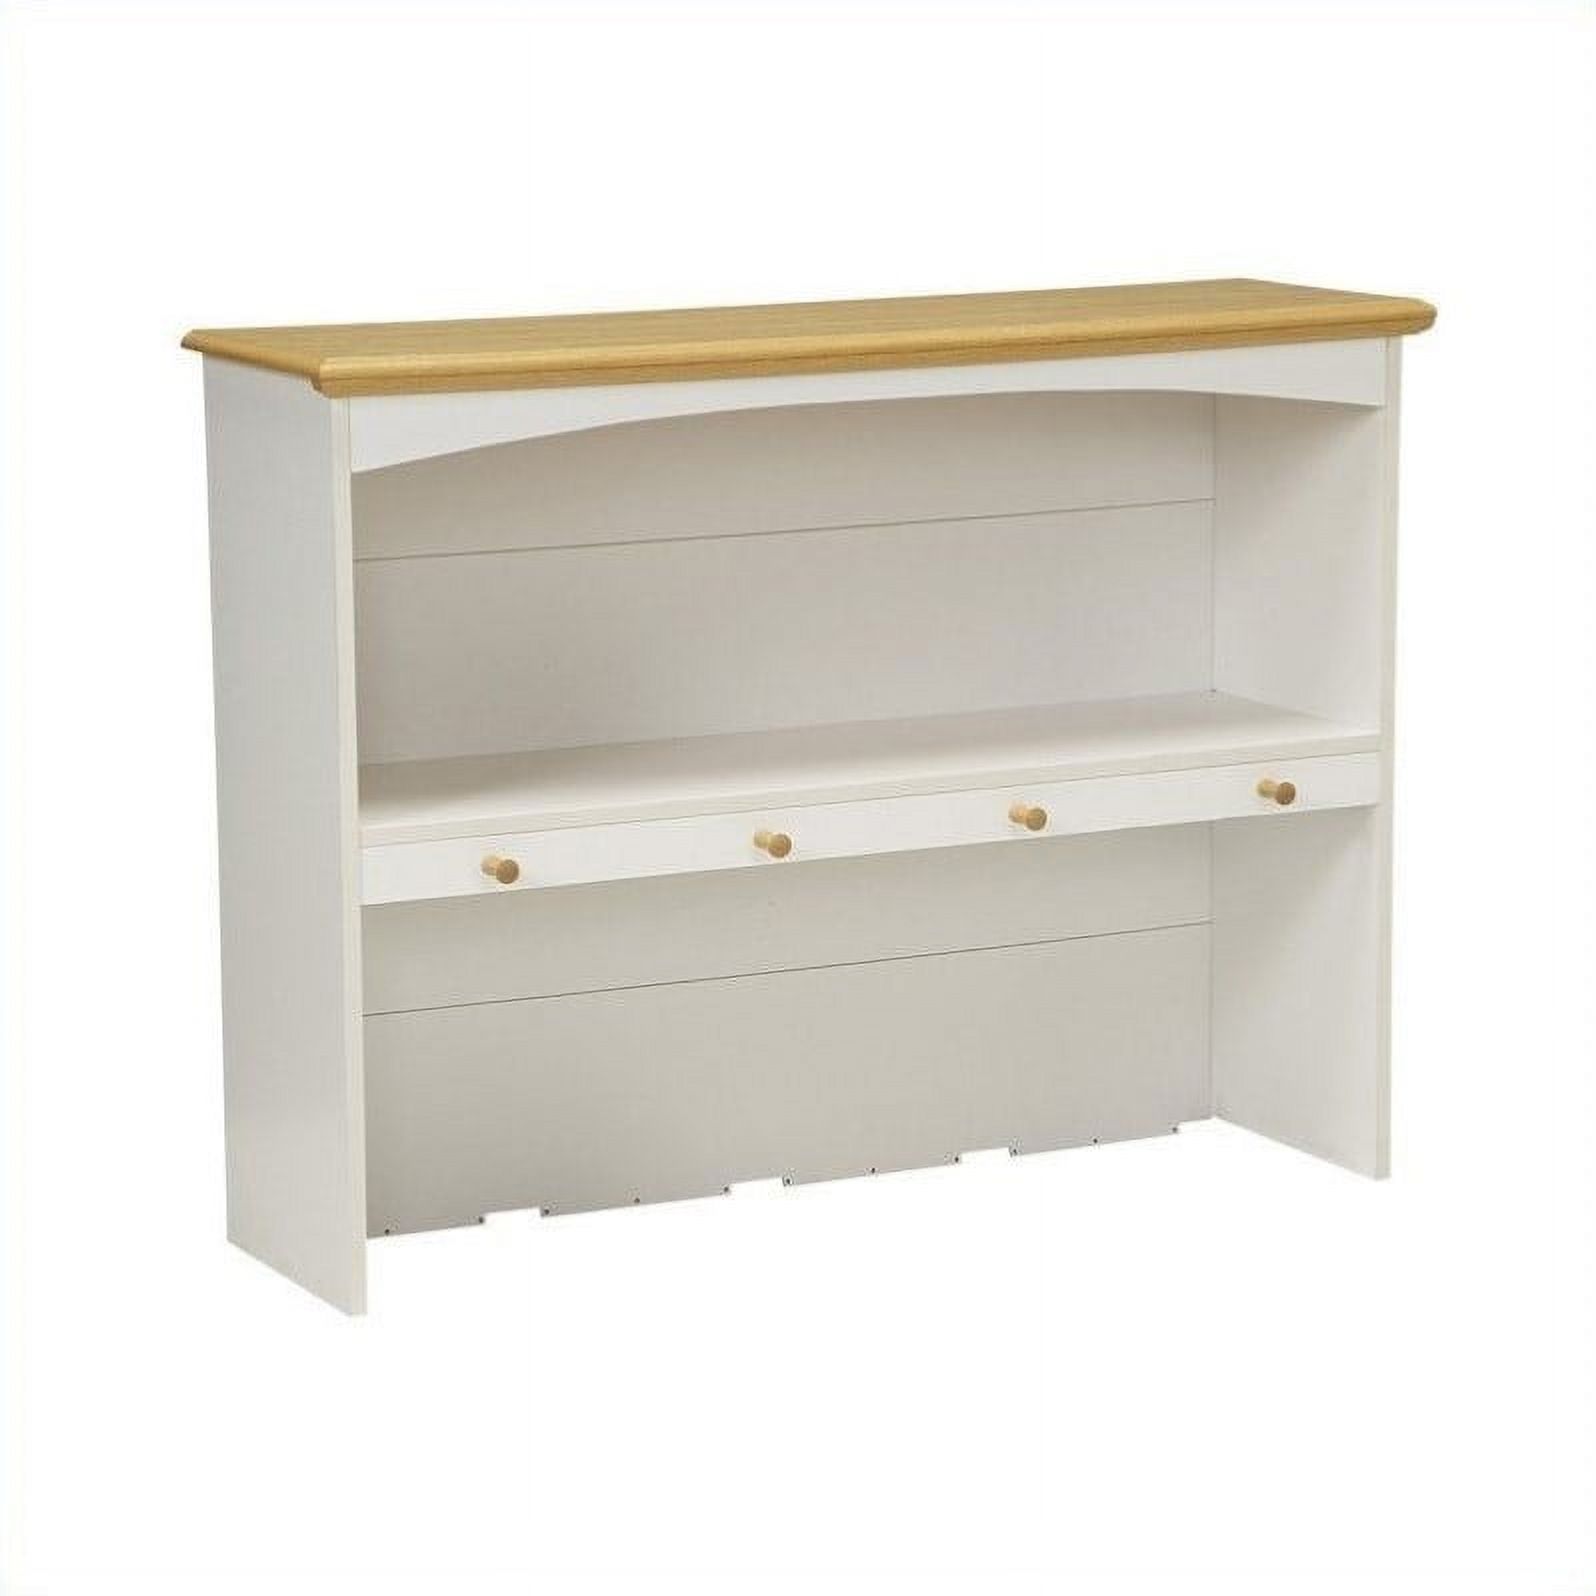 Homestar Lane Furniture Kitchen Hutch with 4 Knobs in White - image 1 of 2